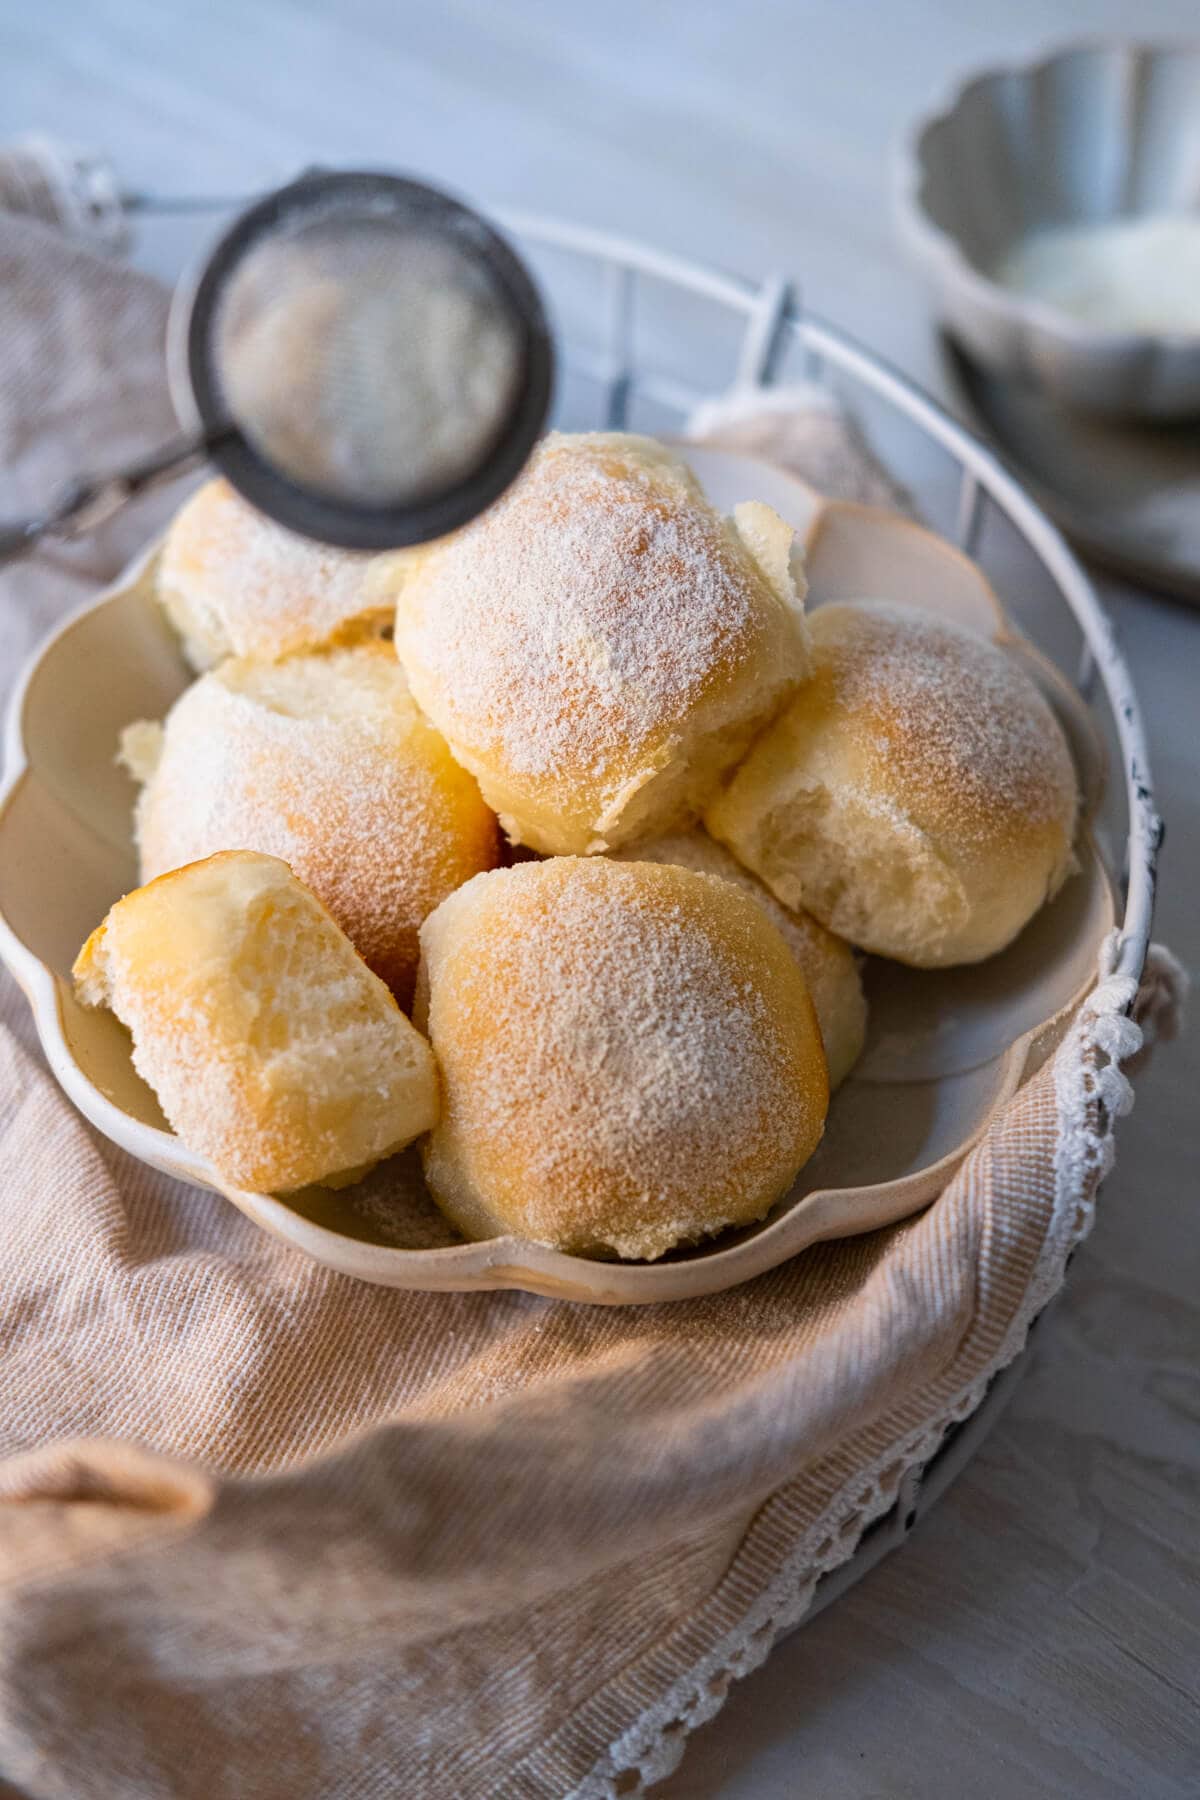 A captivating image showcasing the ingredients for bun, including milk, flour, and butter. The arrangement highlights the essential components for creating these delightful buns, inviting viewers to imagine the soft and fluffy texture and rich flavor that the ingredients promise in the final product.